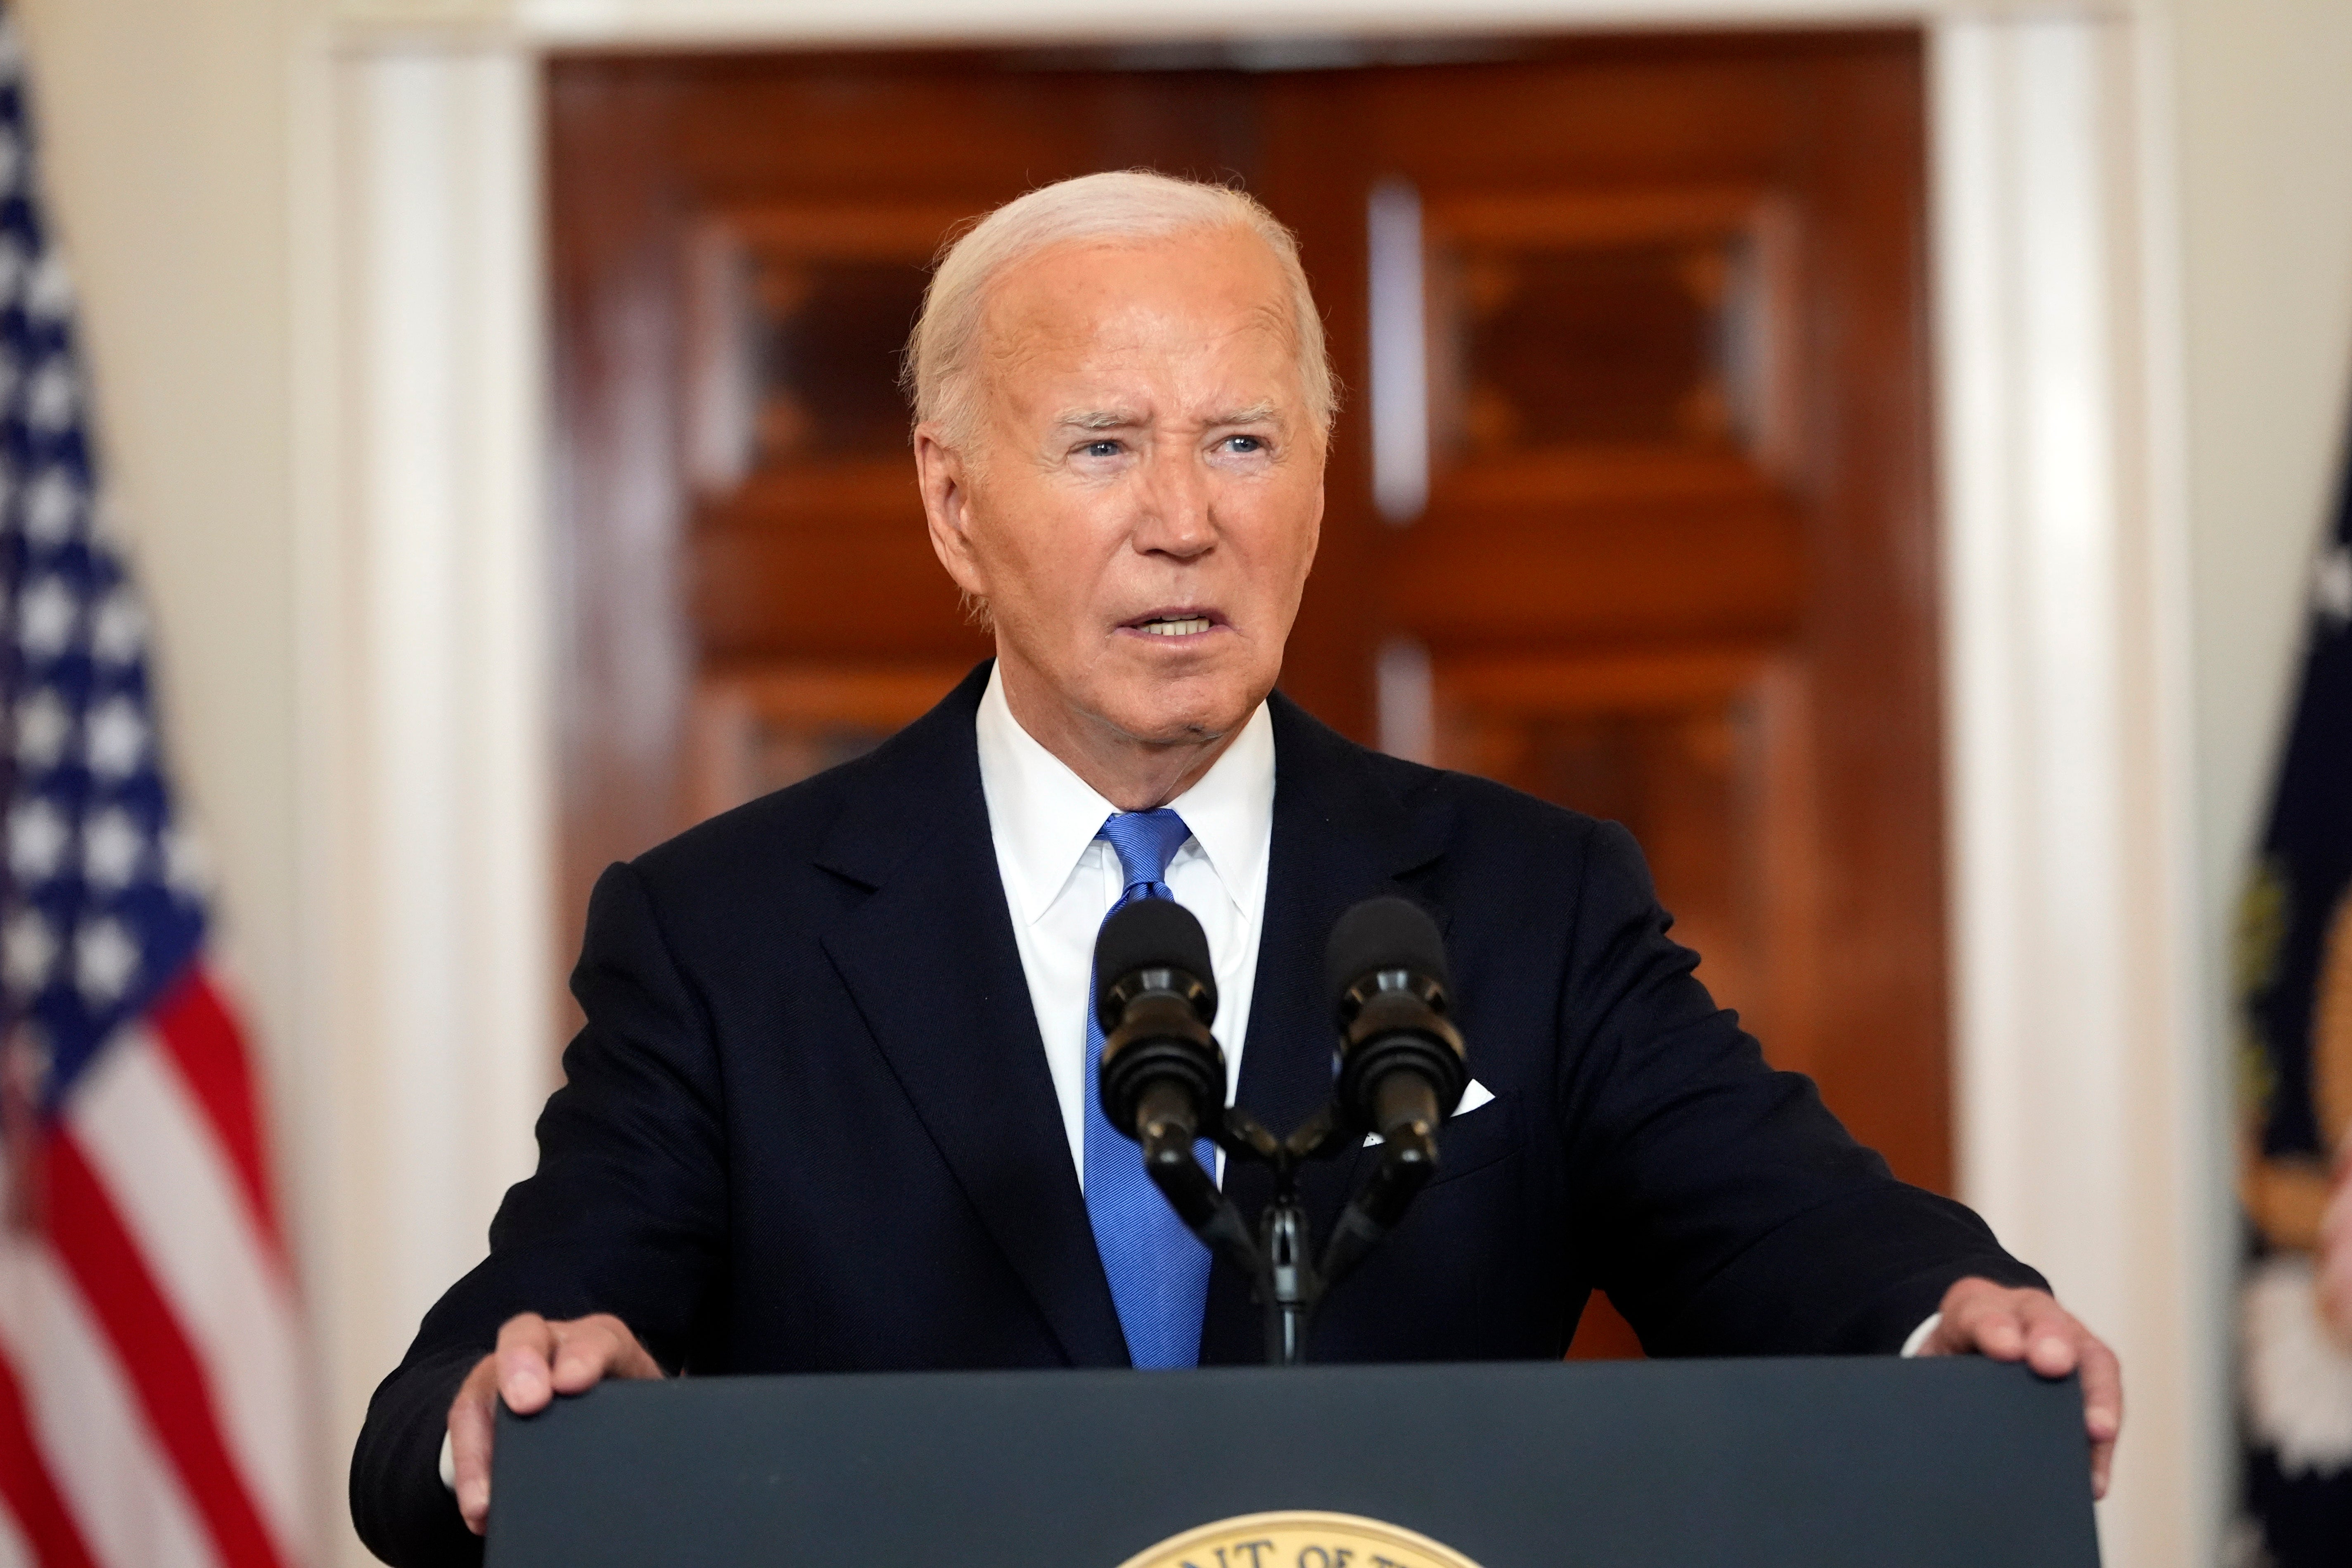 Allies of president Biden have been urged to make him more visible as part of the attempt to reassure voters and party members following his disastrous debate performance last week